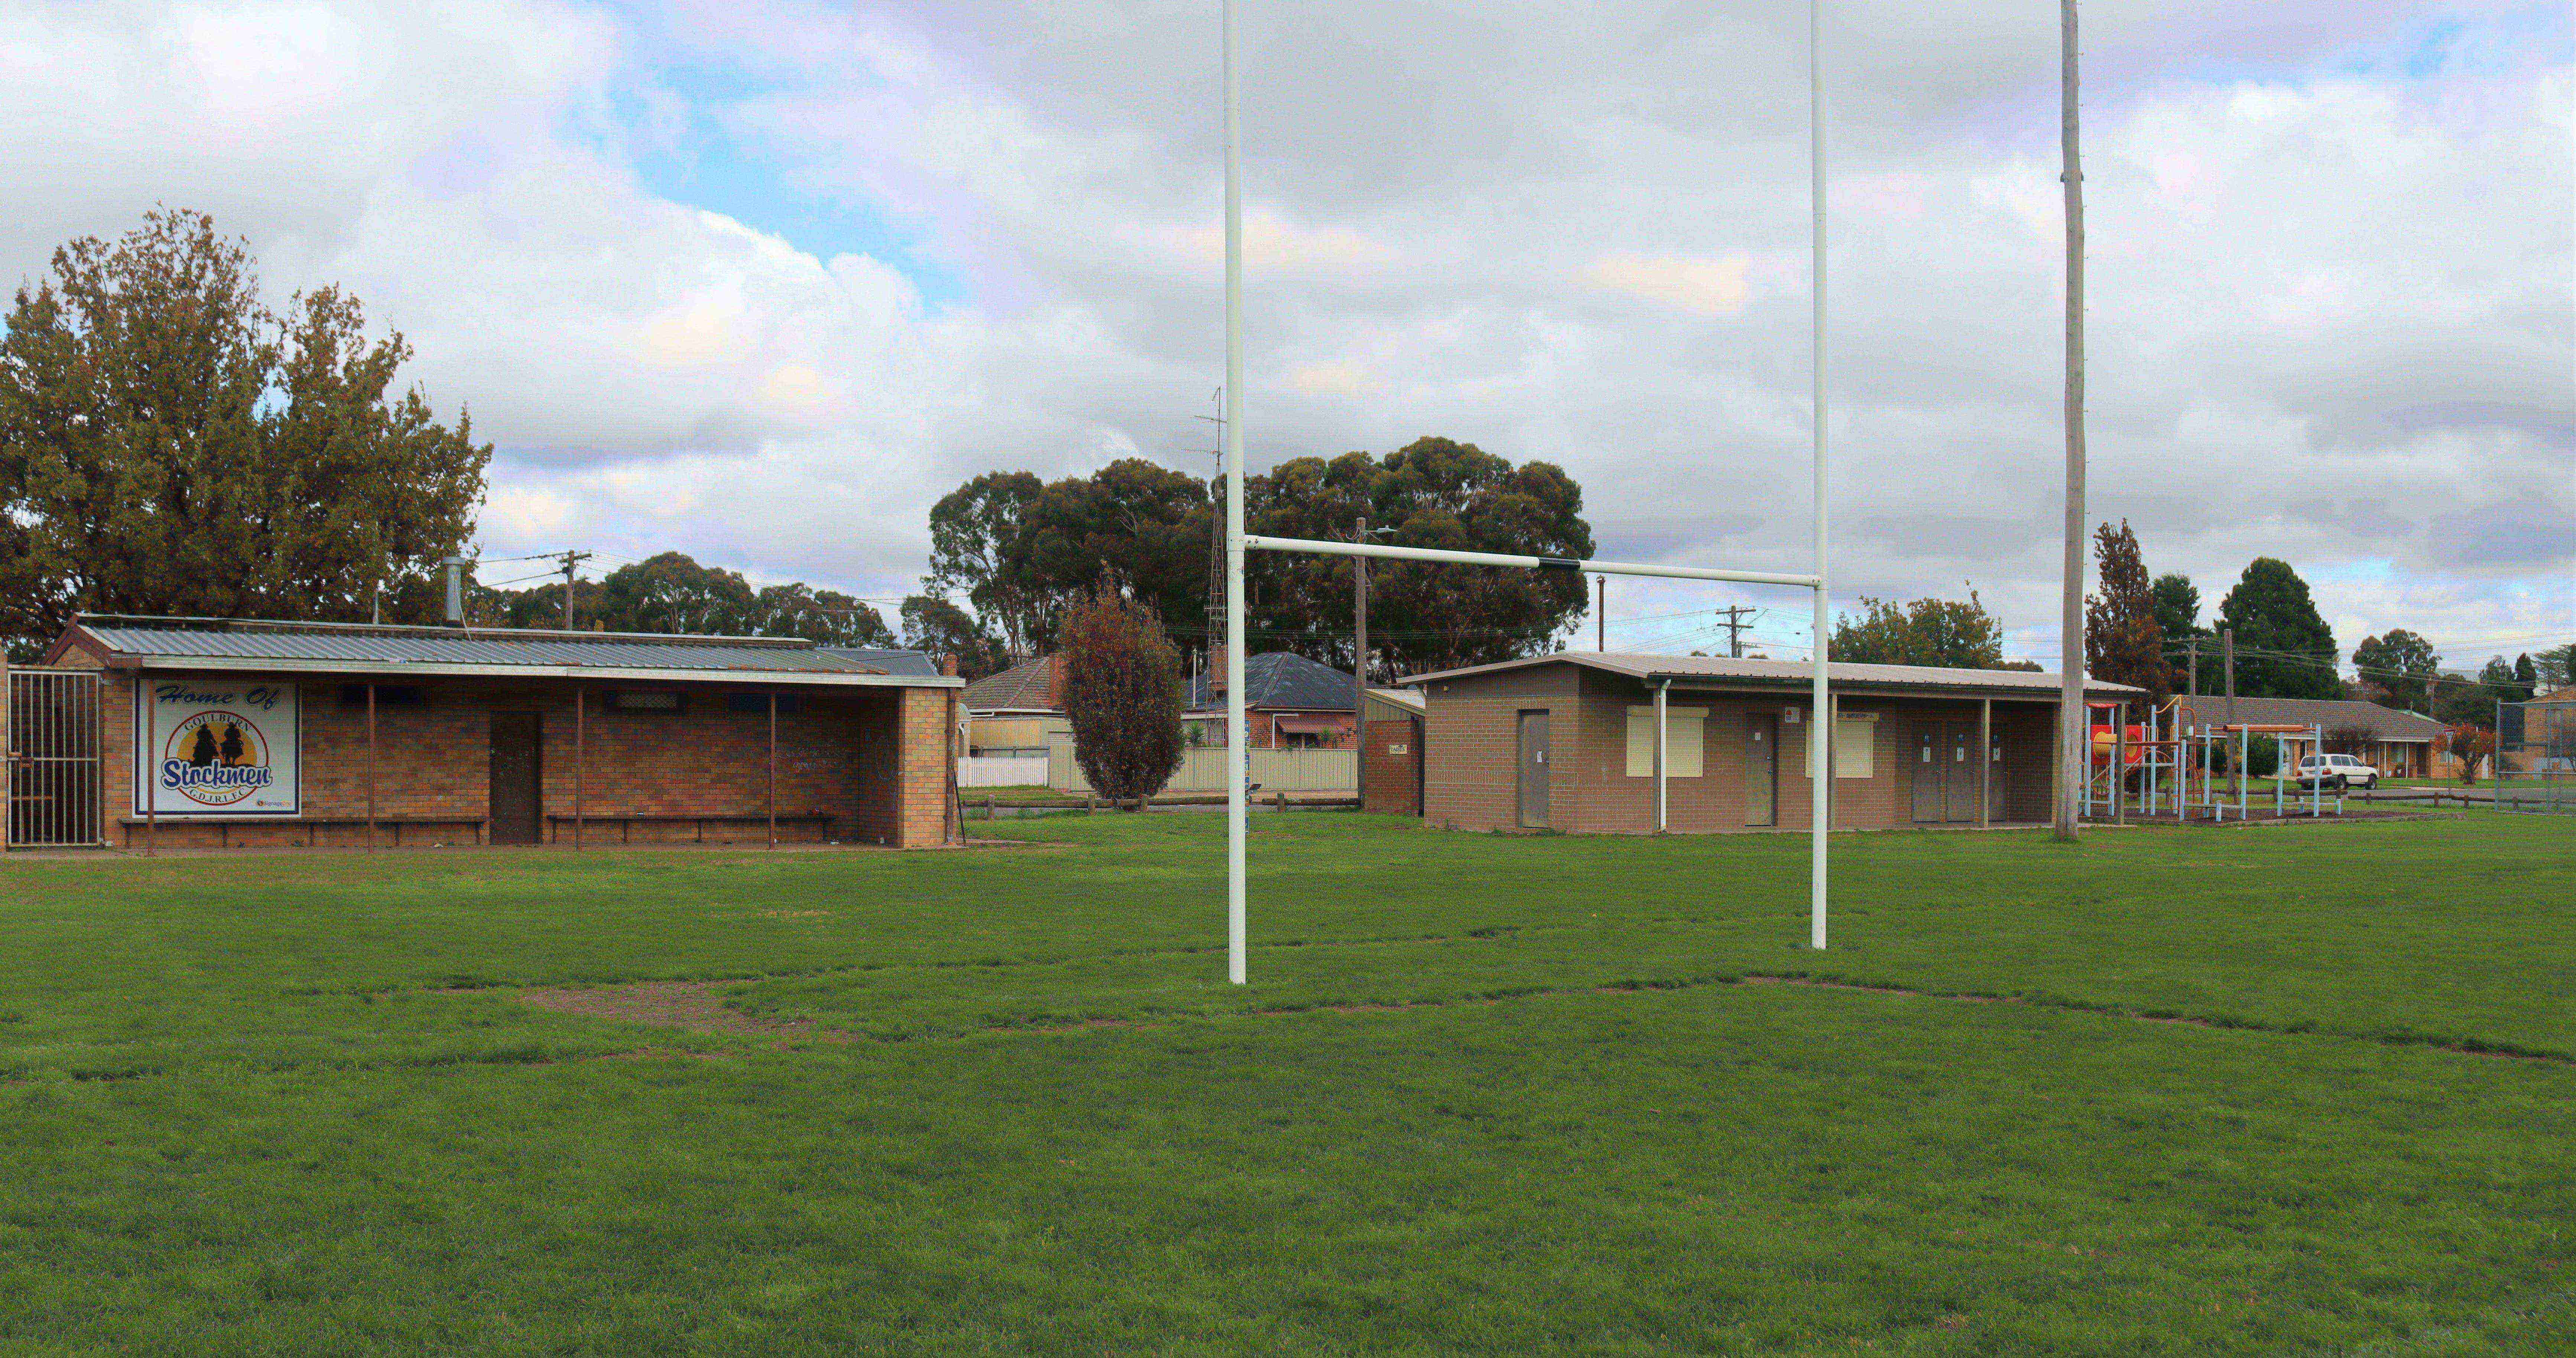 Construction company finally found for Goulburn sports upgrades